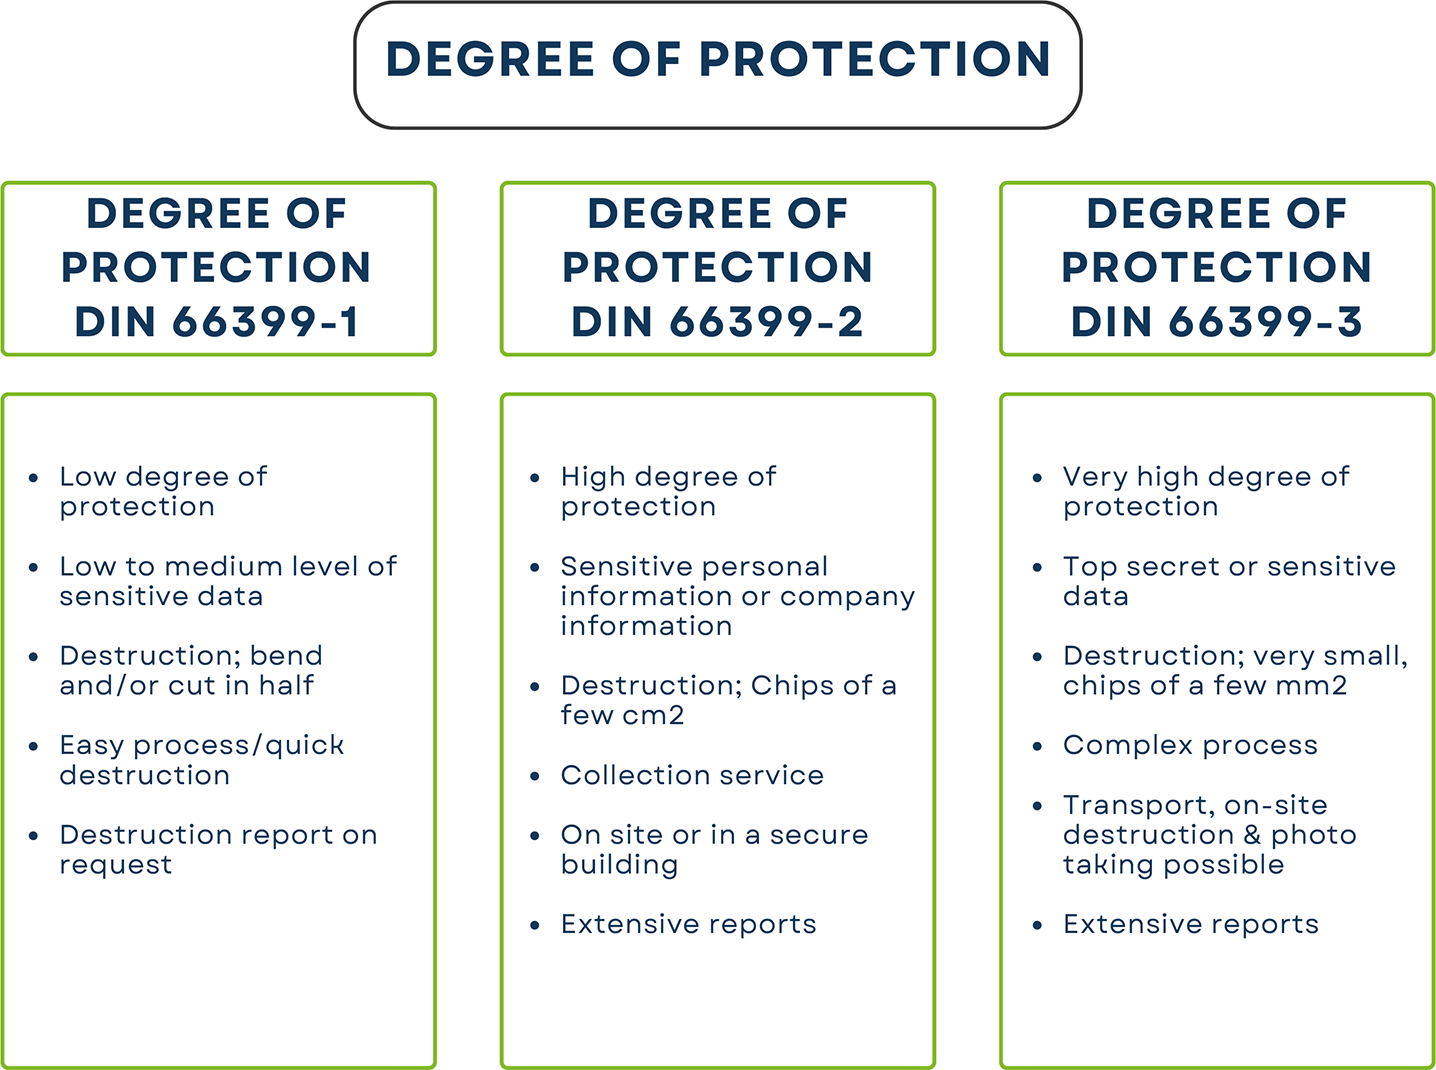 Degree of protection DIN 66399